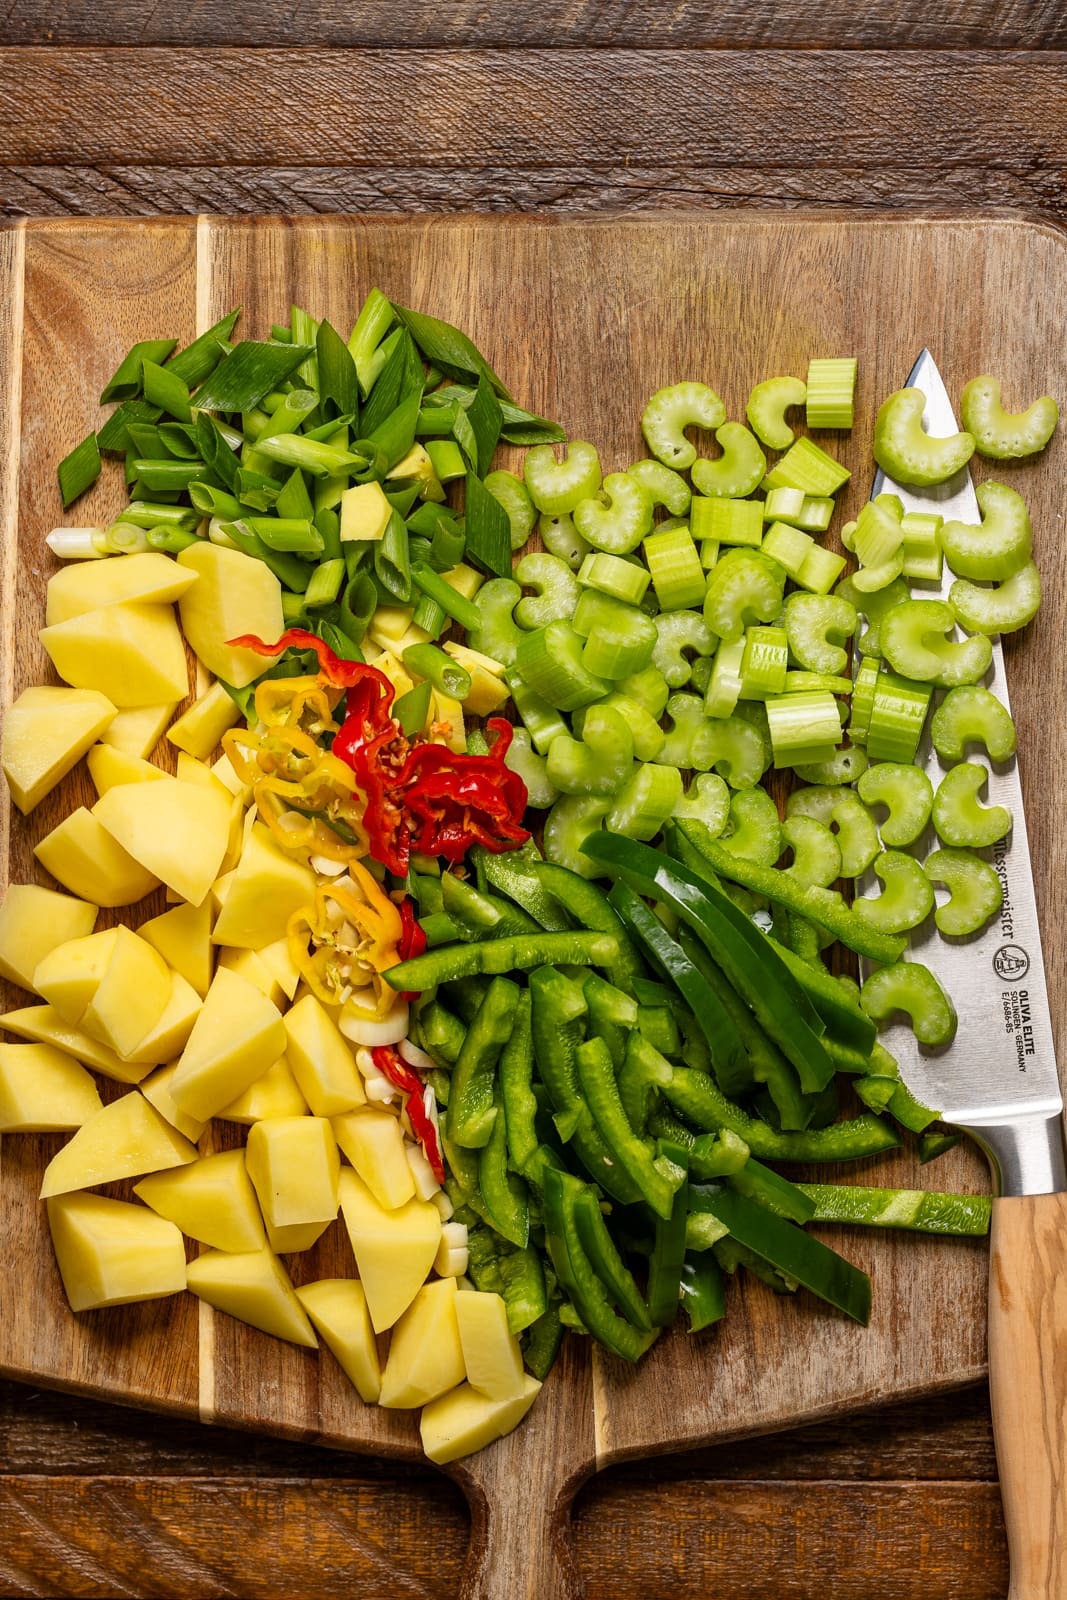 Chopped veggies on a cutting board with a knife.